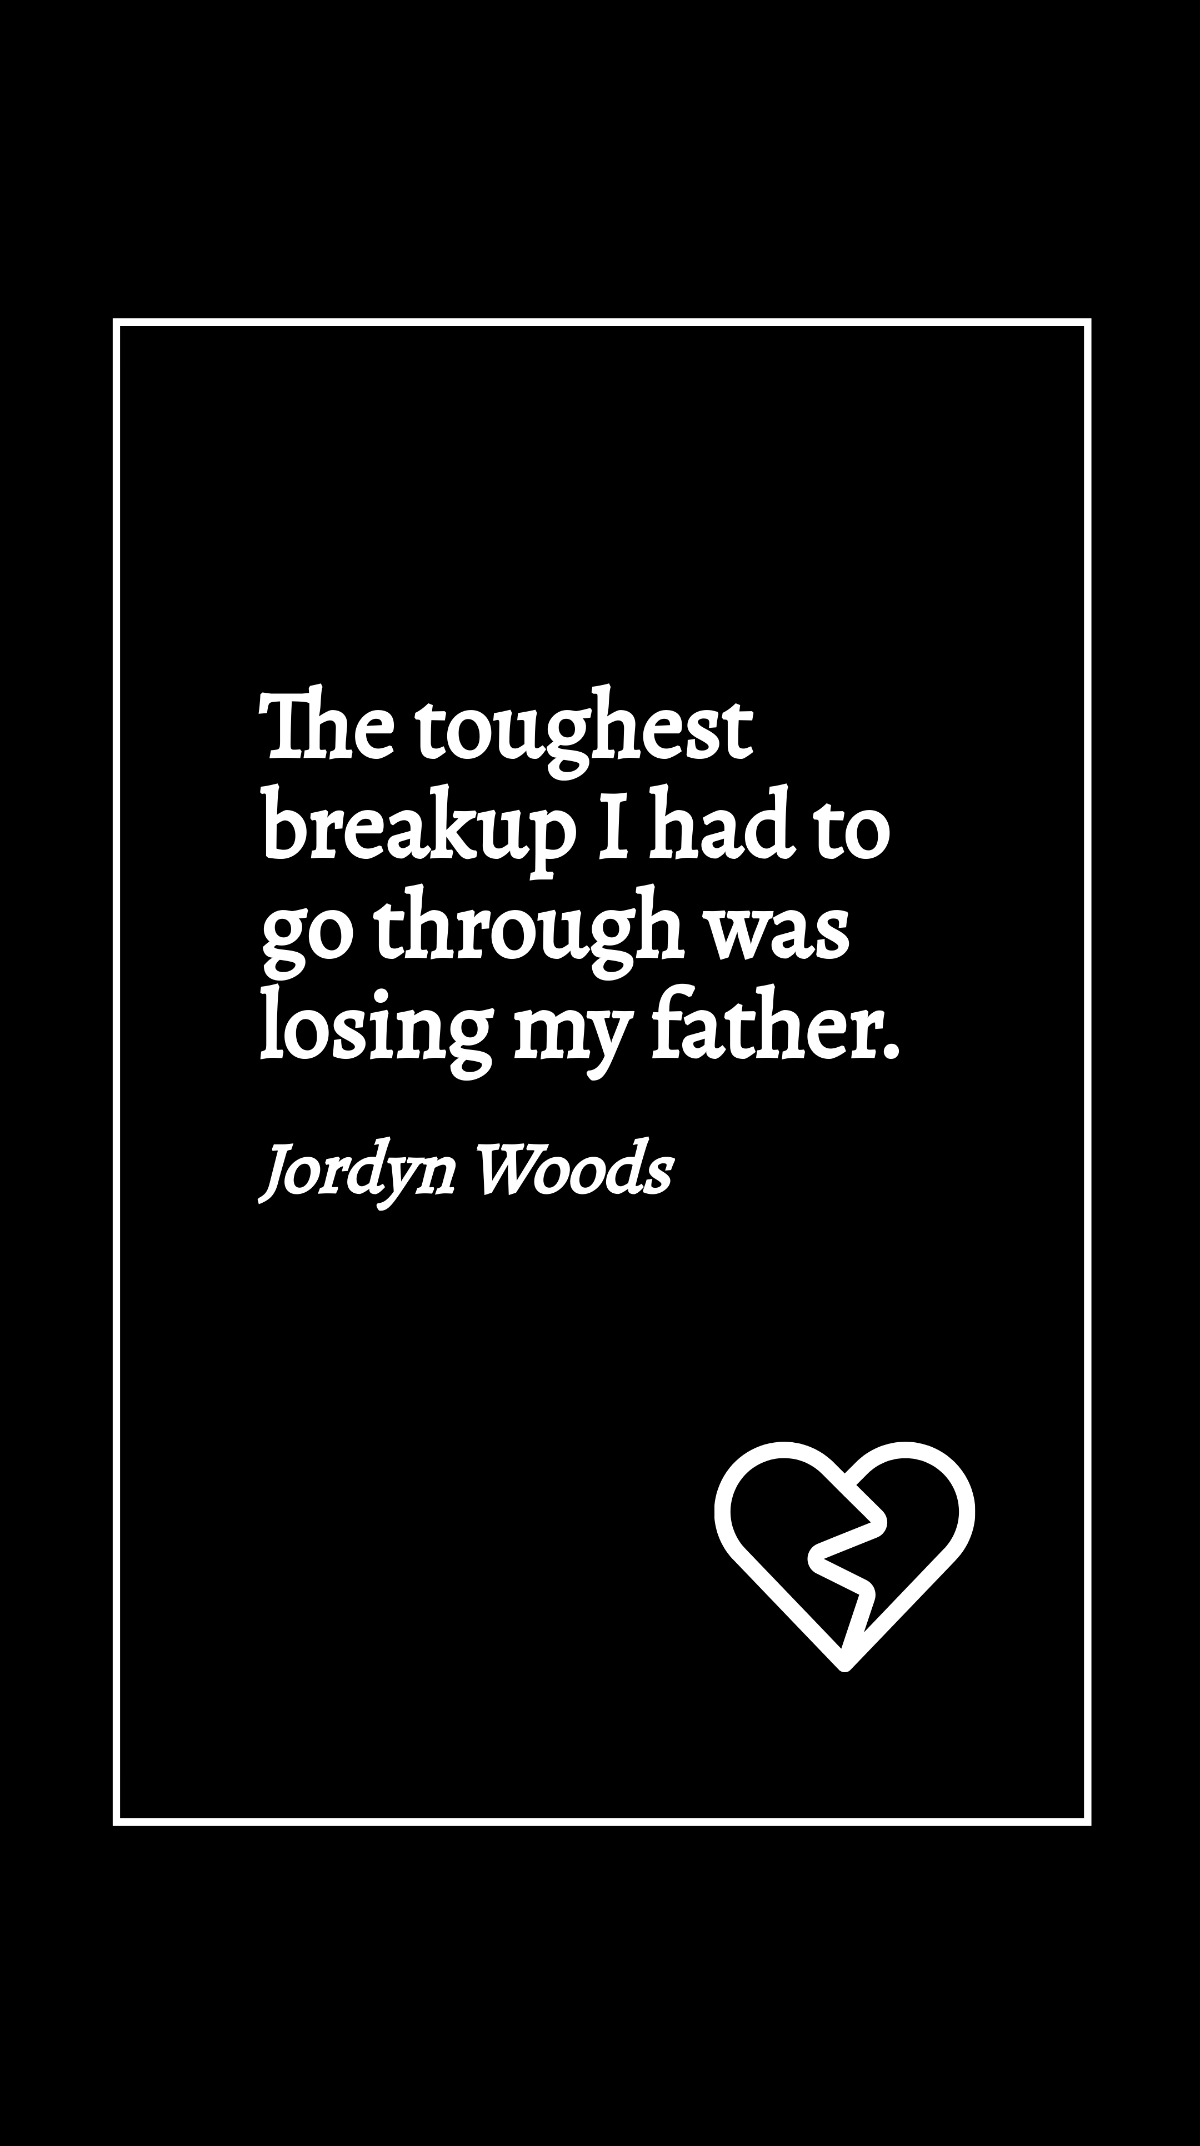 Jordyn Woods - The toughest breakup I had to go through was losing my father.